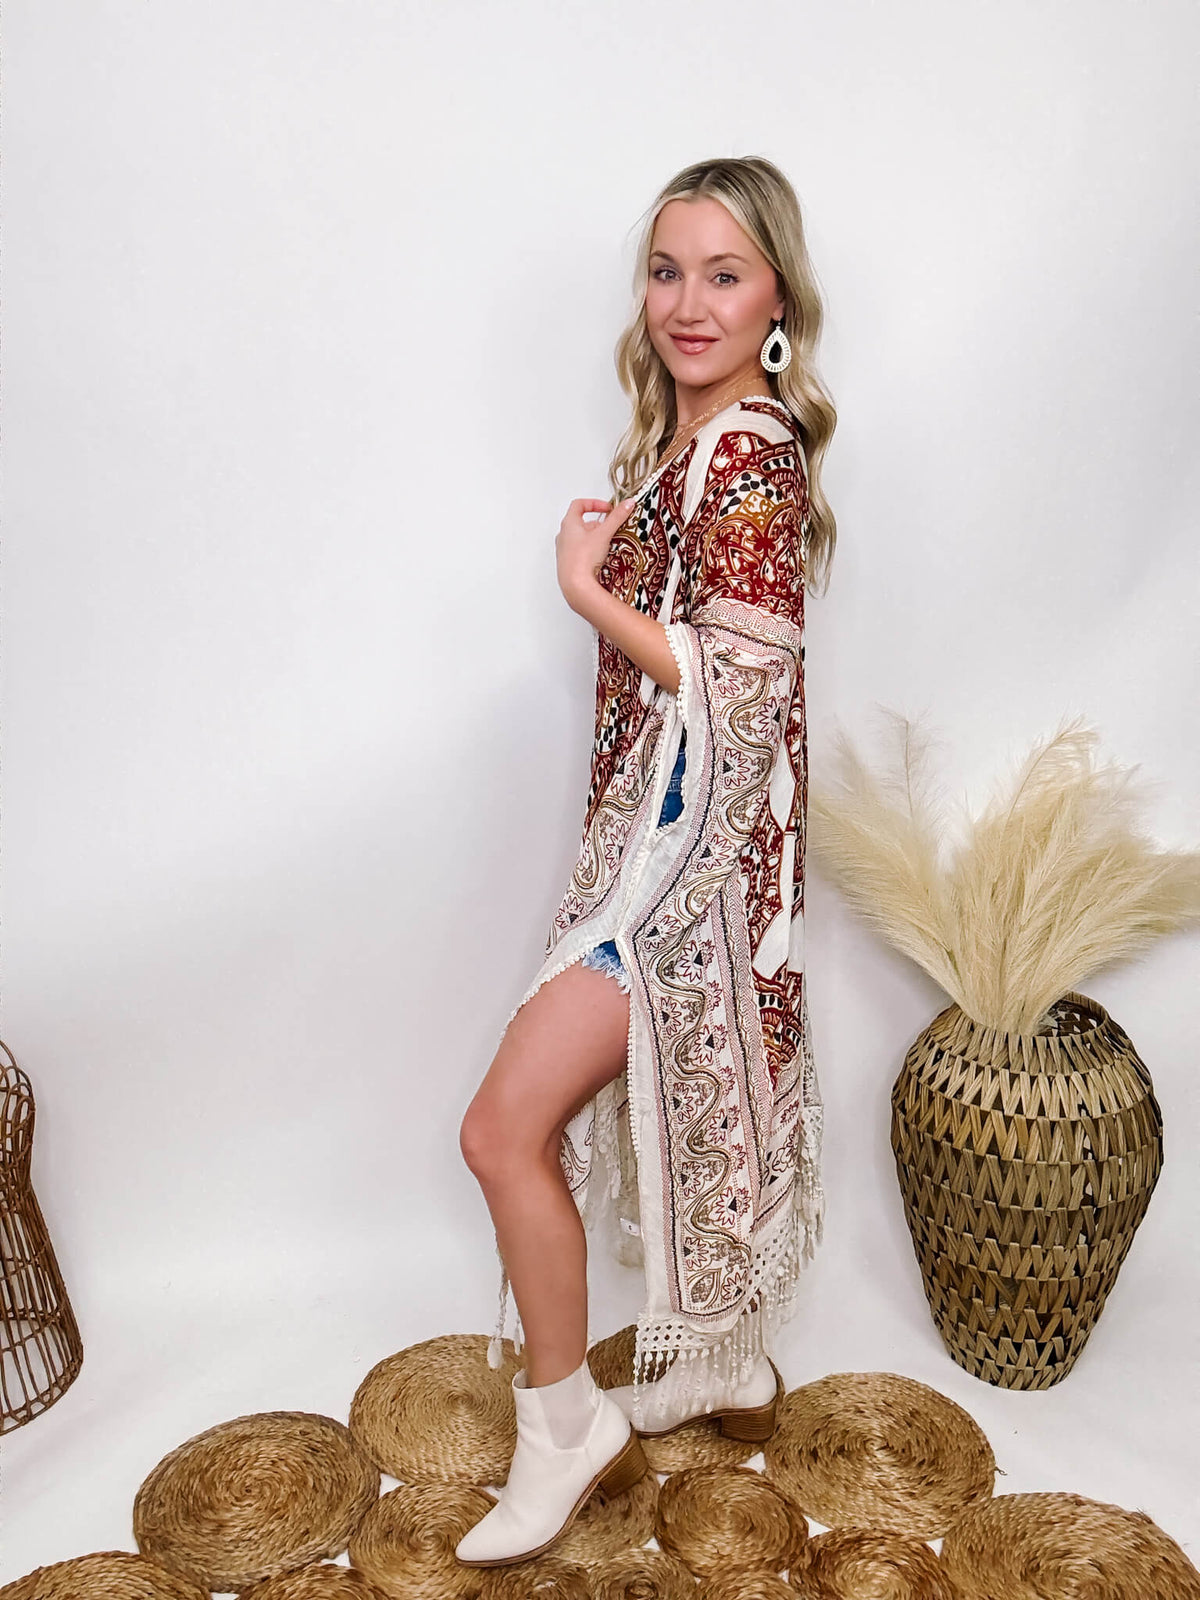 Boho Kimono with Lace Eyelet Crochet and Tassel Details, One Size Fits 0-14, Flowy Oversized Fit, 100% Polyester. 